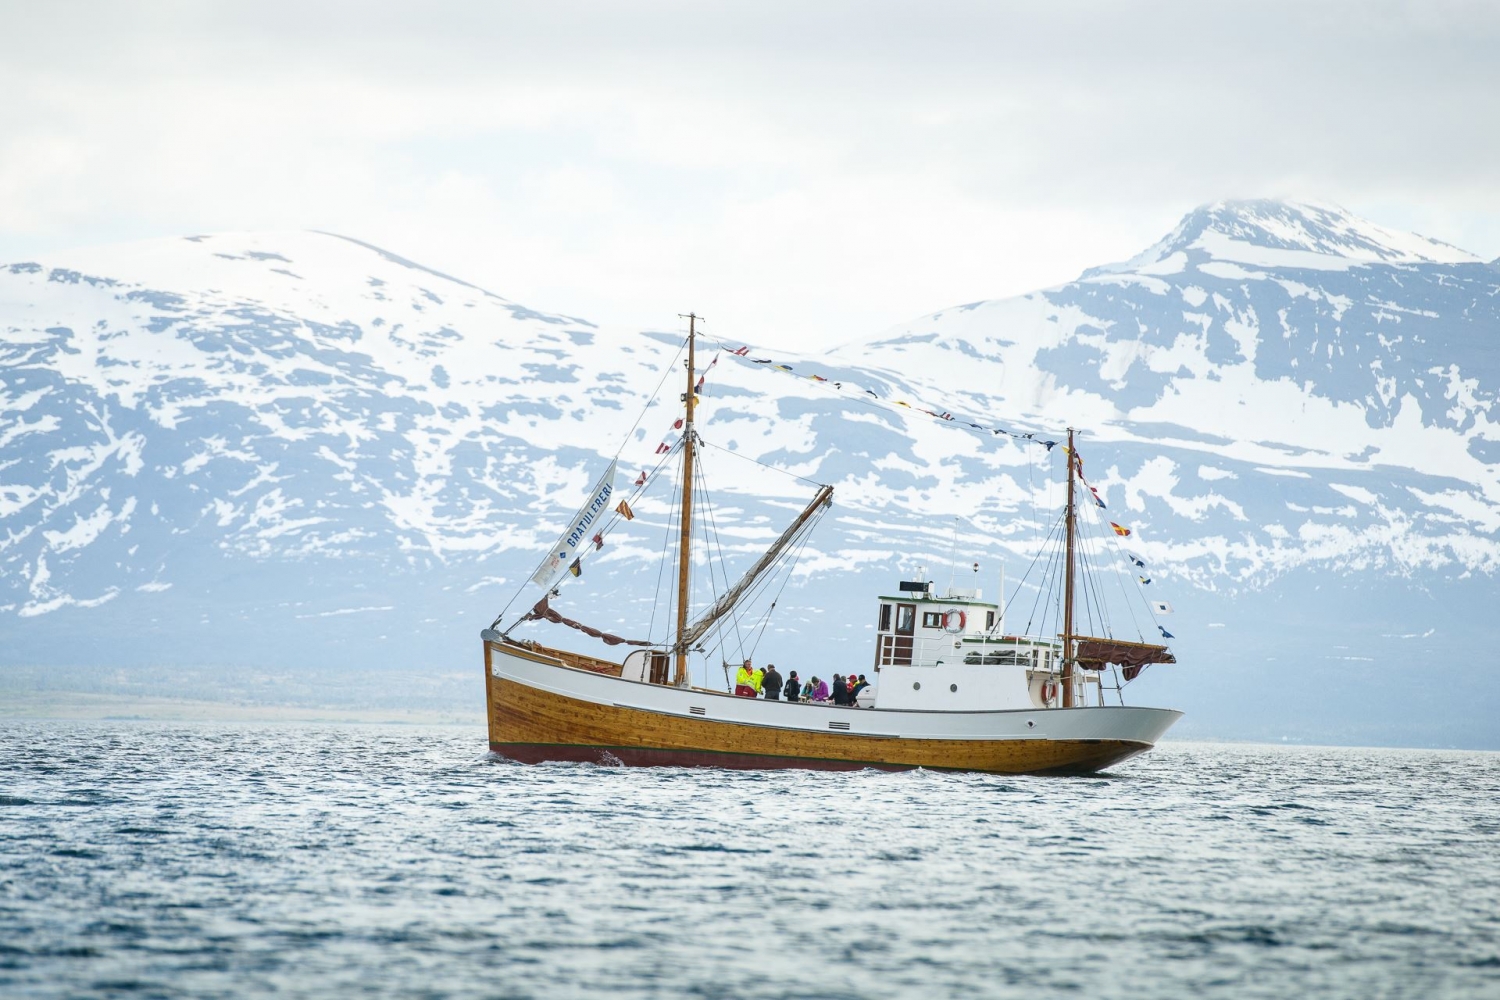 The wooden boat Hermes II out on the sea with snowy mountains in the background